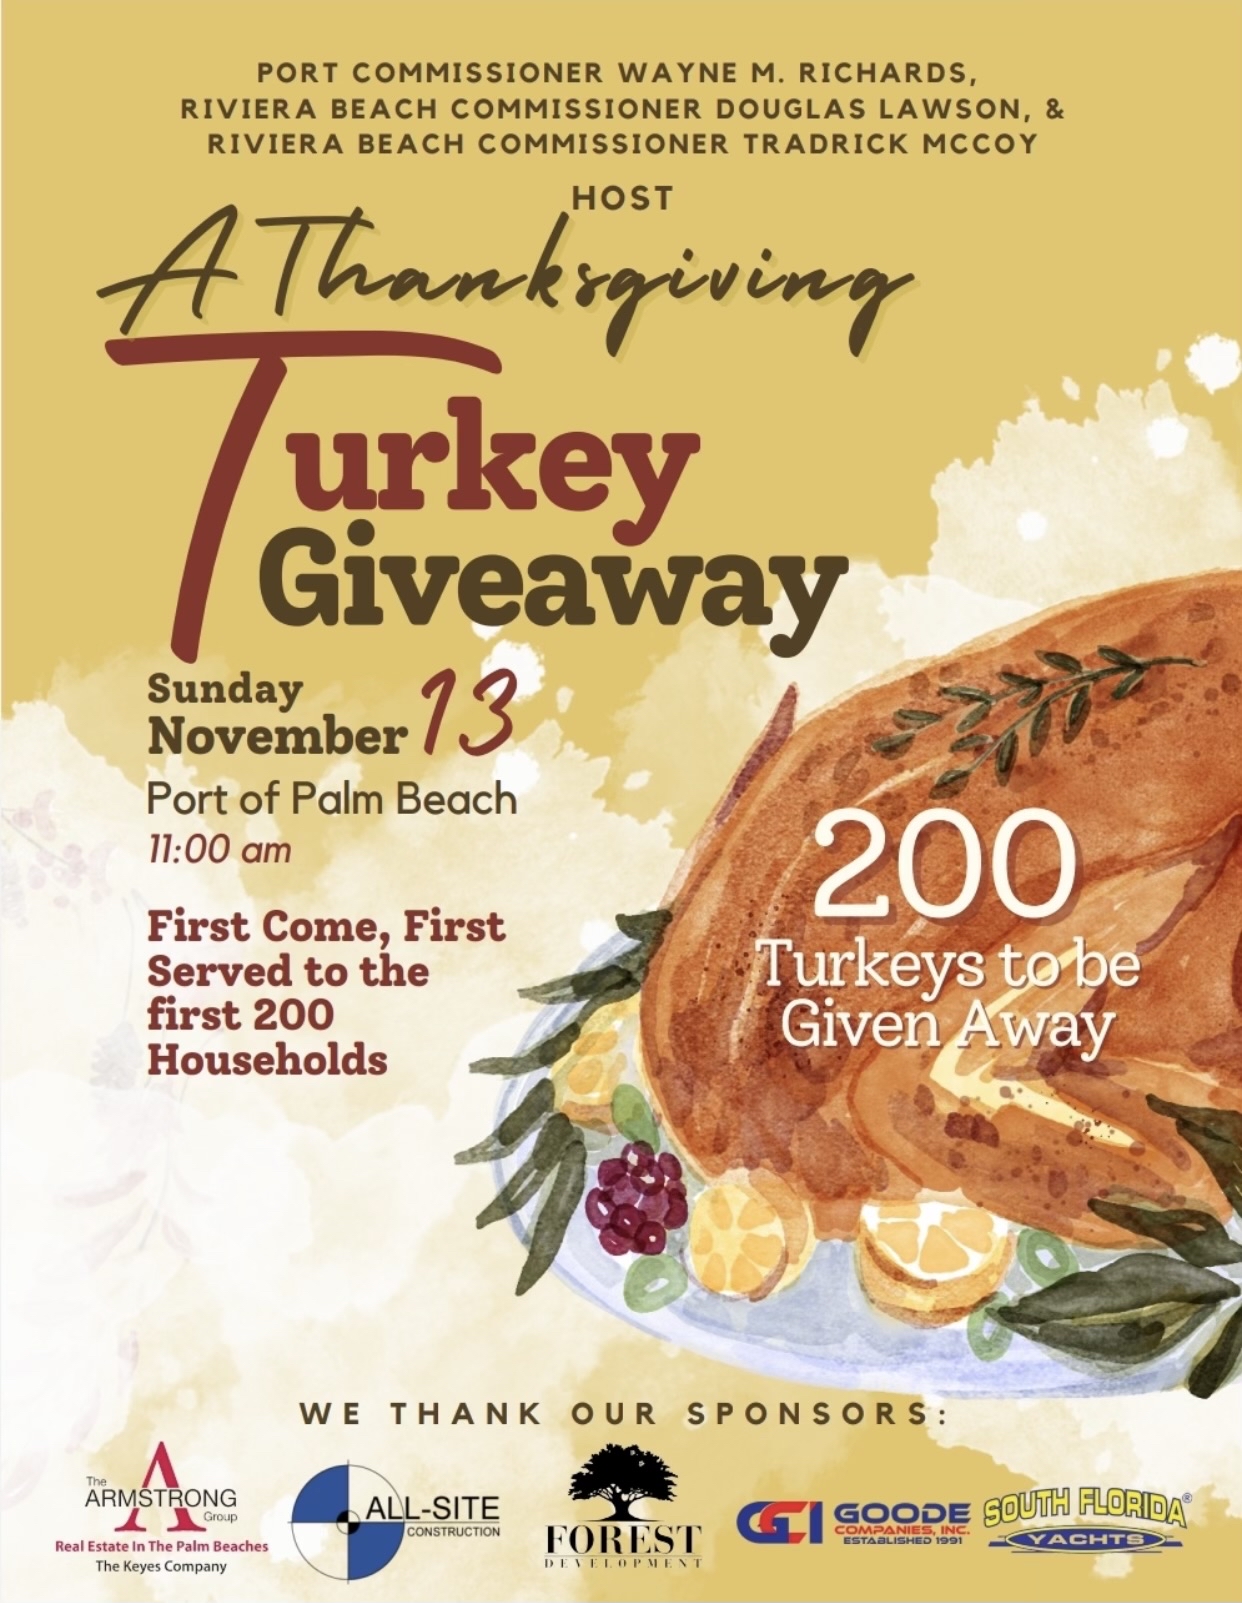 PORT COMMISSIONER WAYNE M. RICHARDS, RIVIERA BEACH COMMISSIONER DOUGLAS LAWSON, & RIVIERA BEACH COMMISSIONER TRADRICK MCCOY A Thanksgiving urkey Giveaway Sunday November 13 Port of Palm Beach 11:00 am First Come, First Served to the first 200 Households 200 Turkeys tobe Given Away